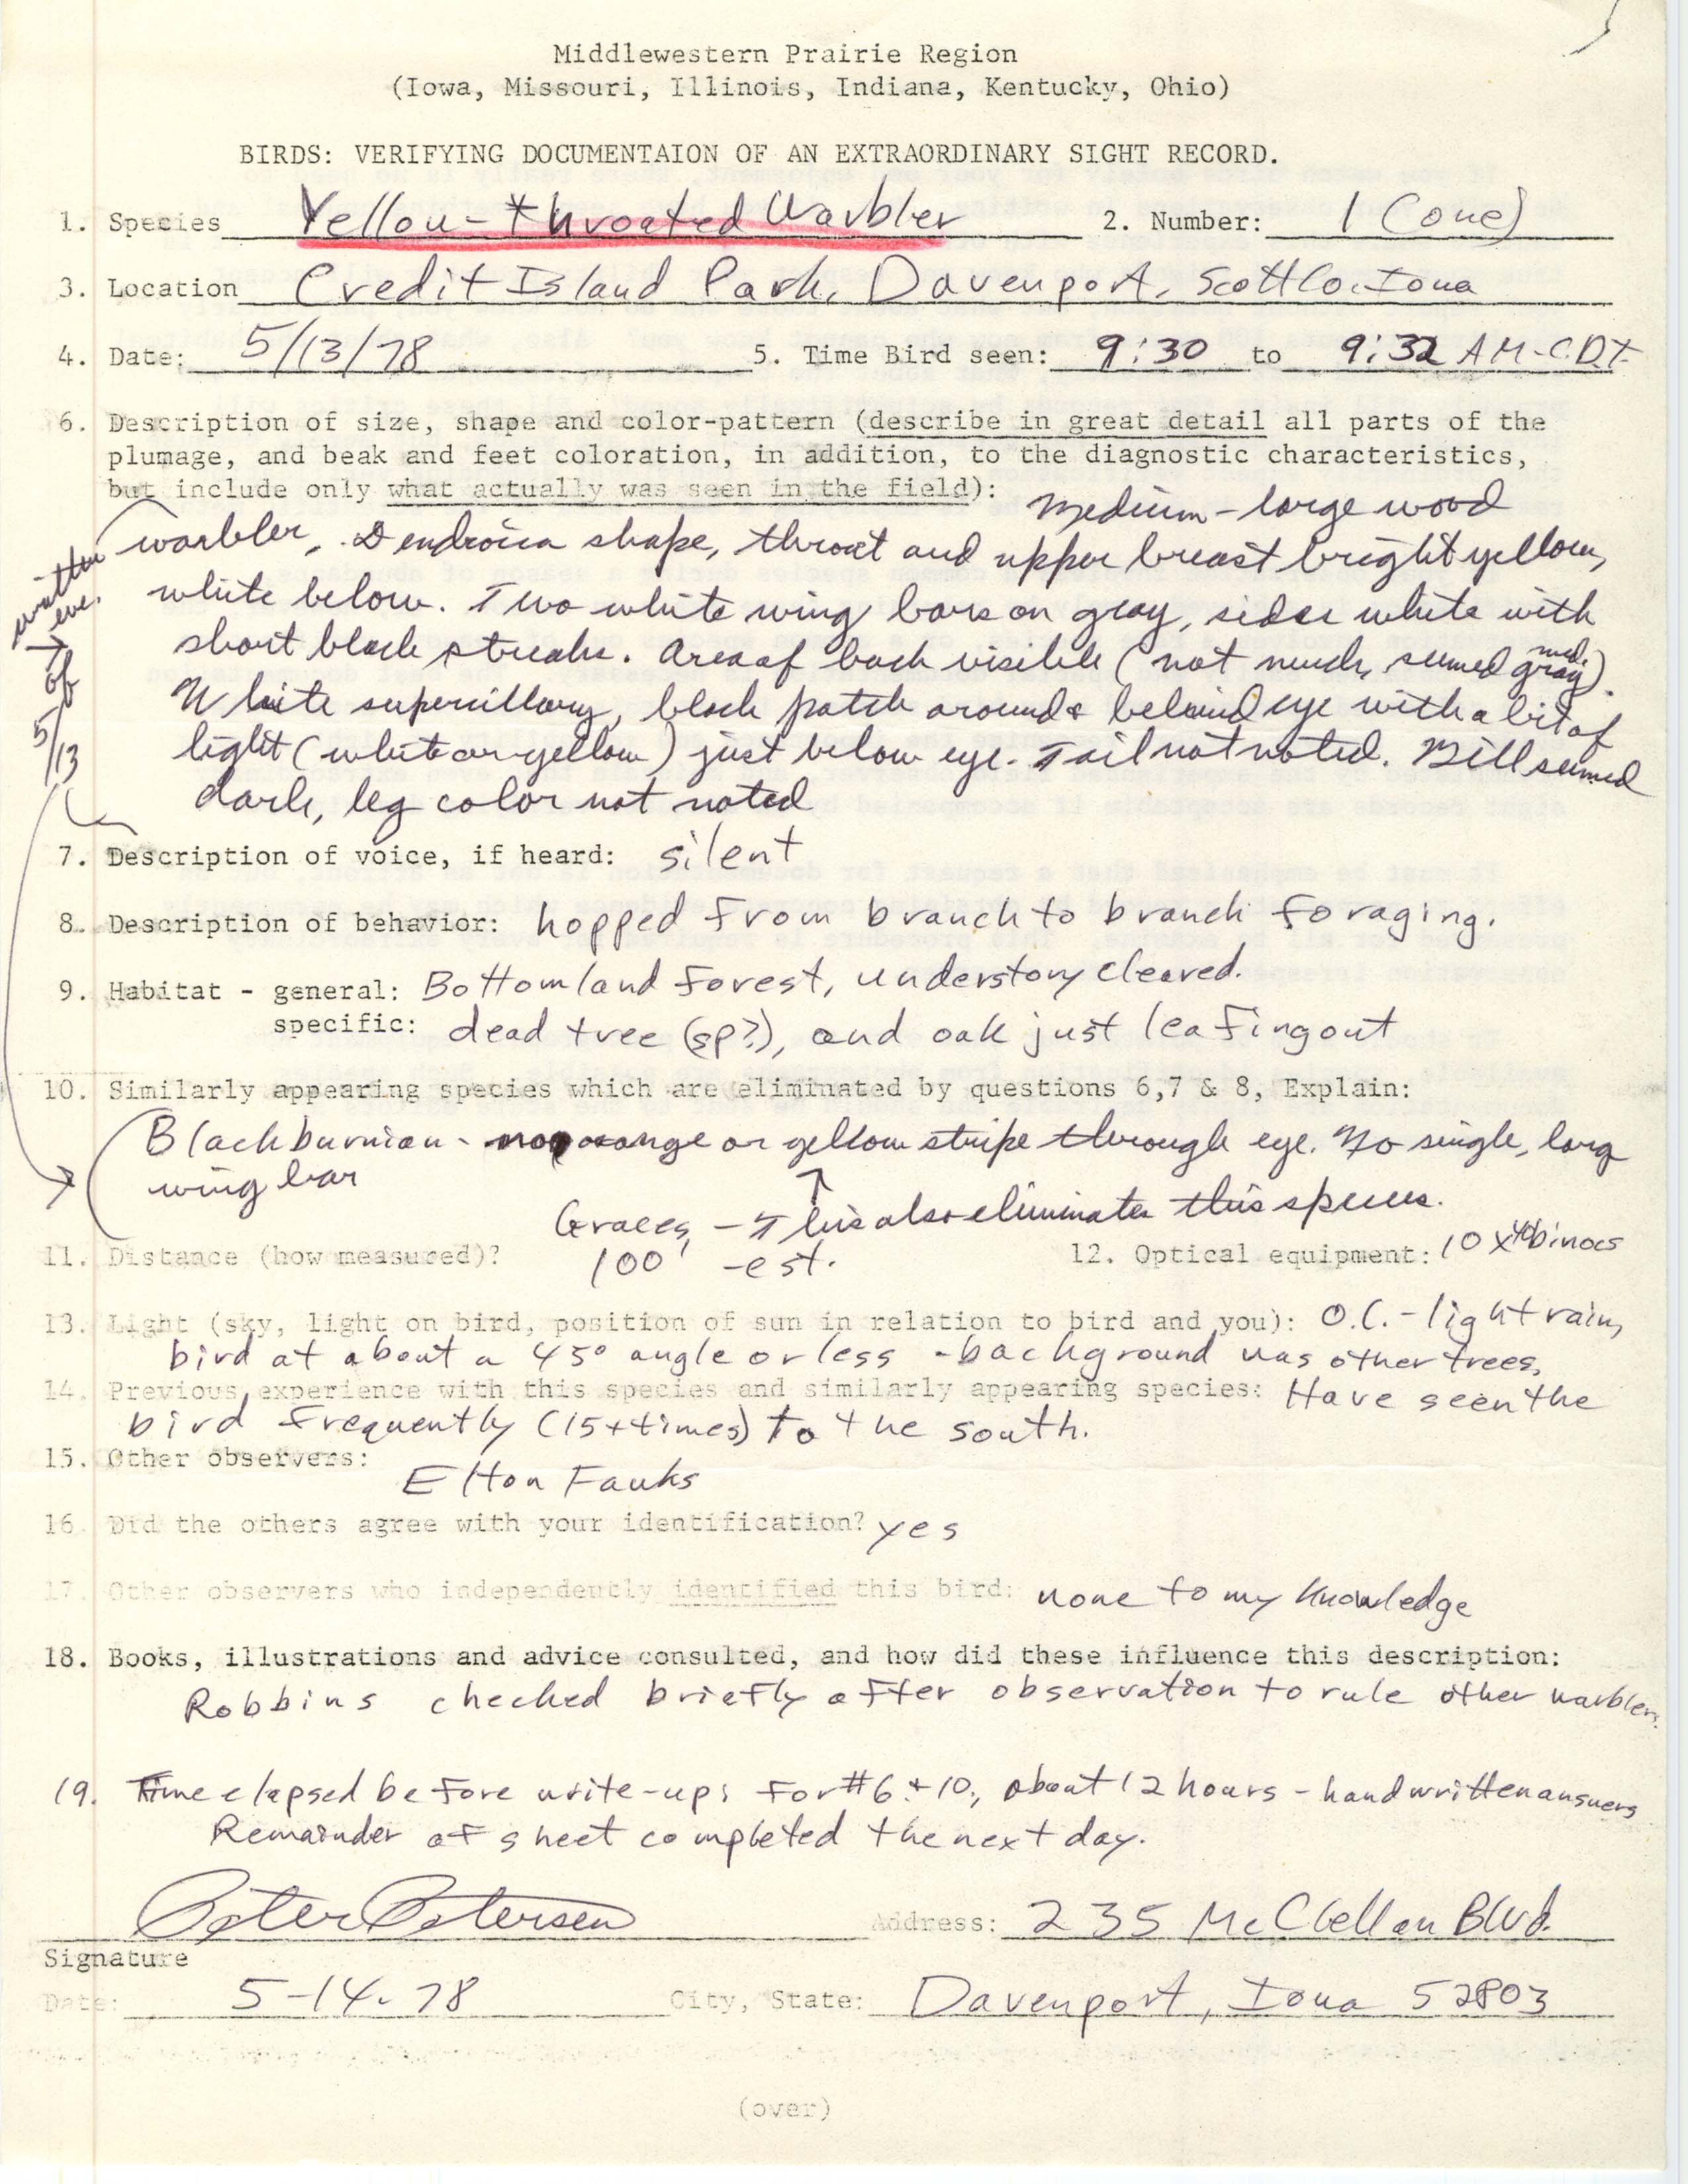 Rare bird documentation form for Yellow-throated Warbler at Credit Island Park in Davenport, 1978